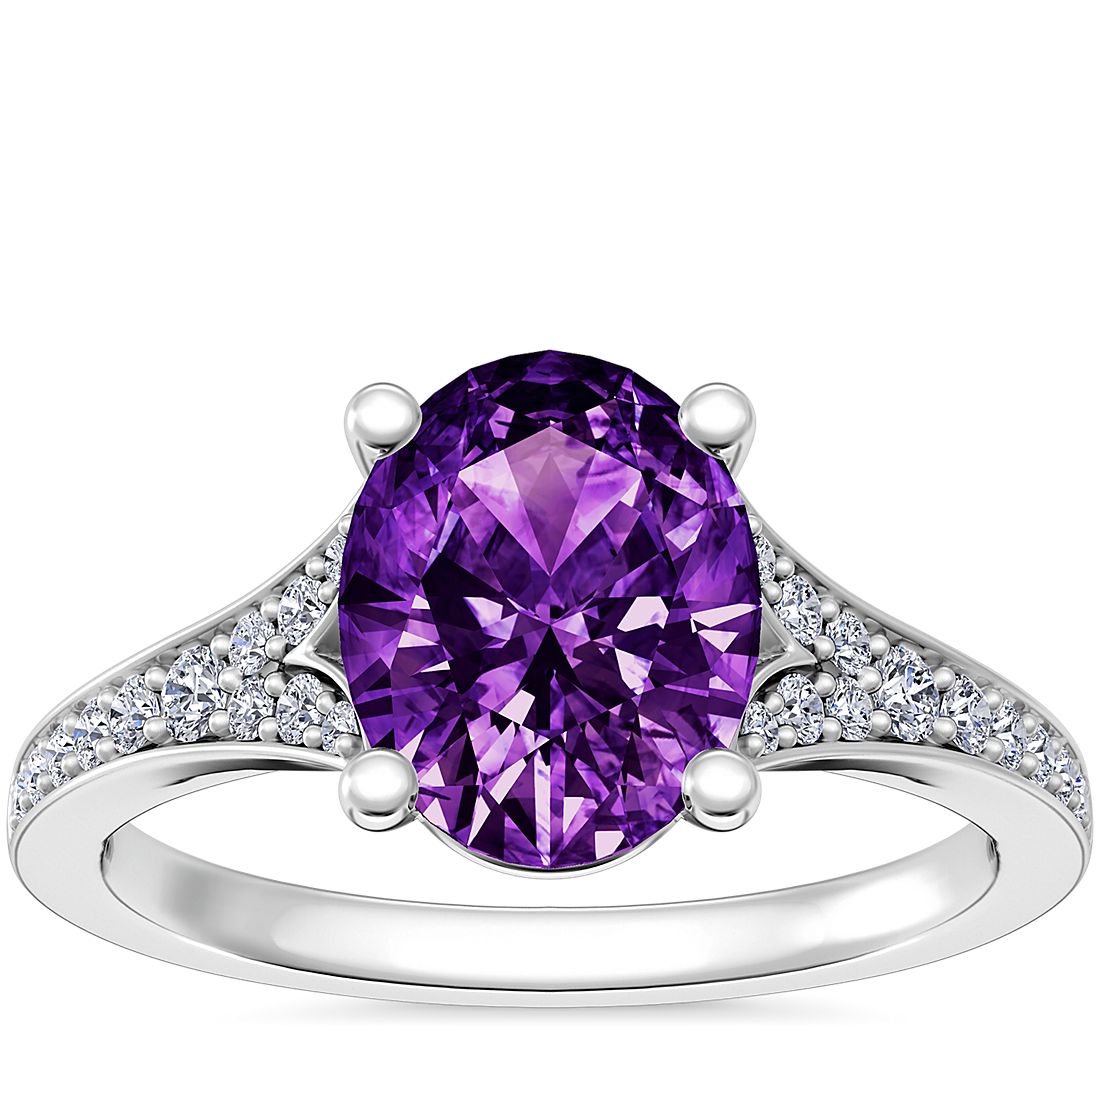 Petite Split Shank Pavé Cathedral Engagement Ring with Oval Amethyst in 14k White Gold (9x7mm)